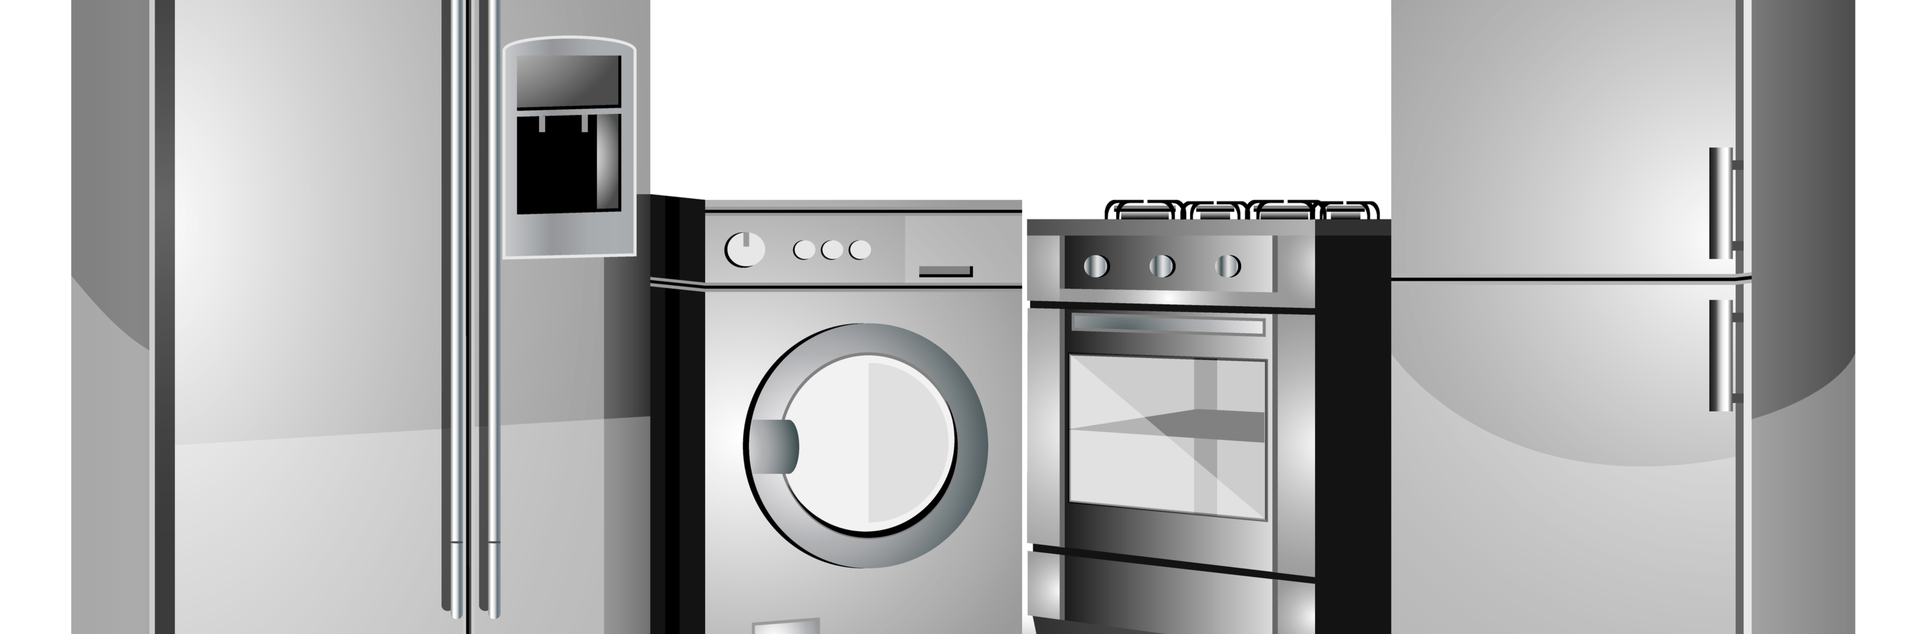 Appliance Repairs  - Don't Replace. Just Repair It